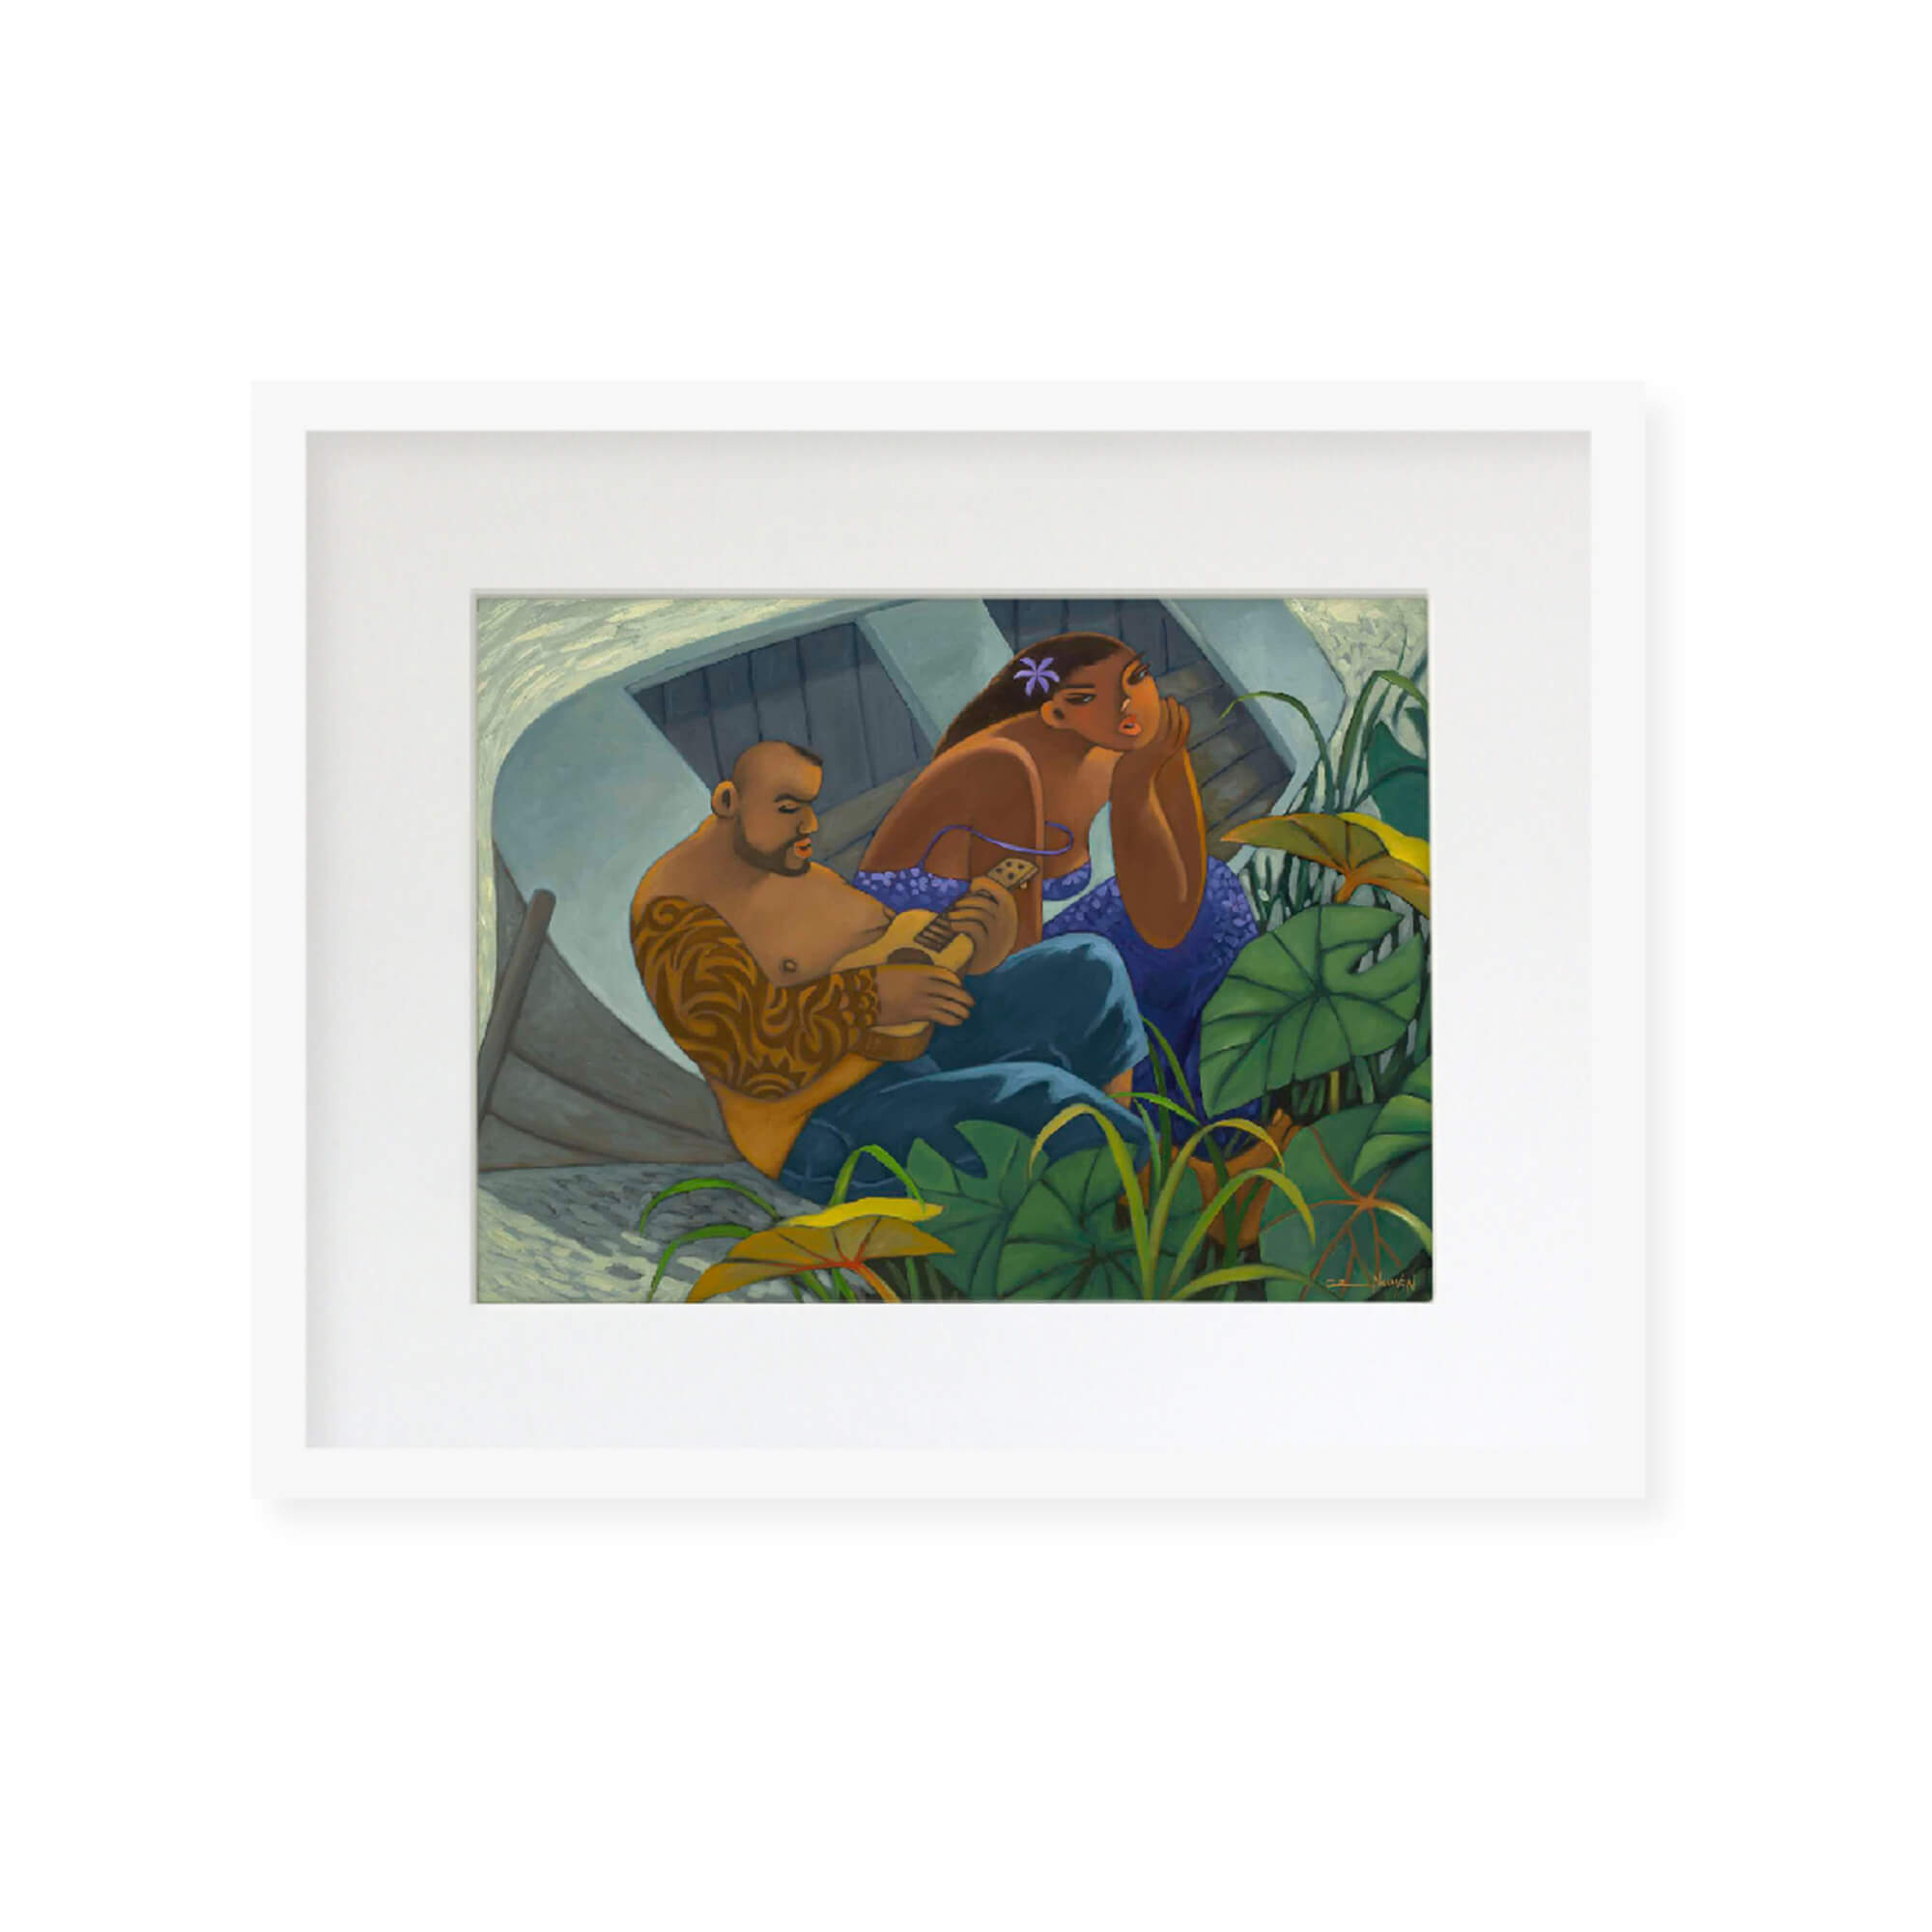 Framed matted art print of a man serenading a woman with a ukulele at the beach by Hawaii artist Tim Nguyen